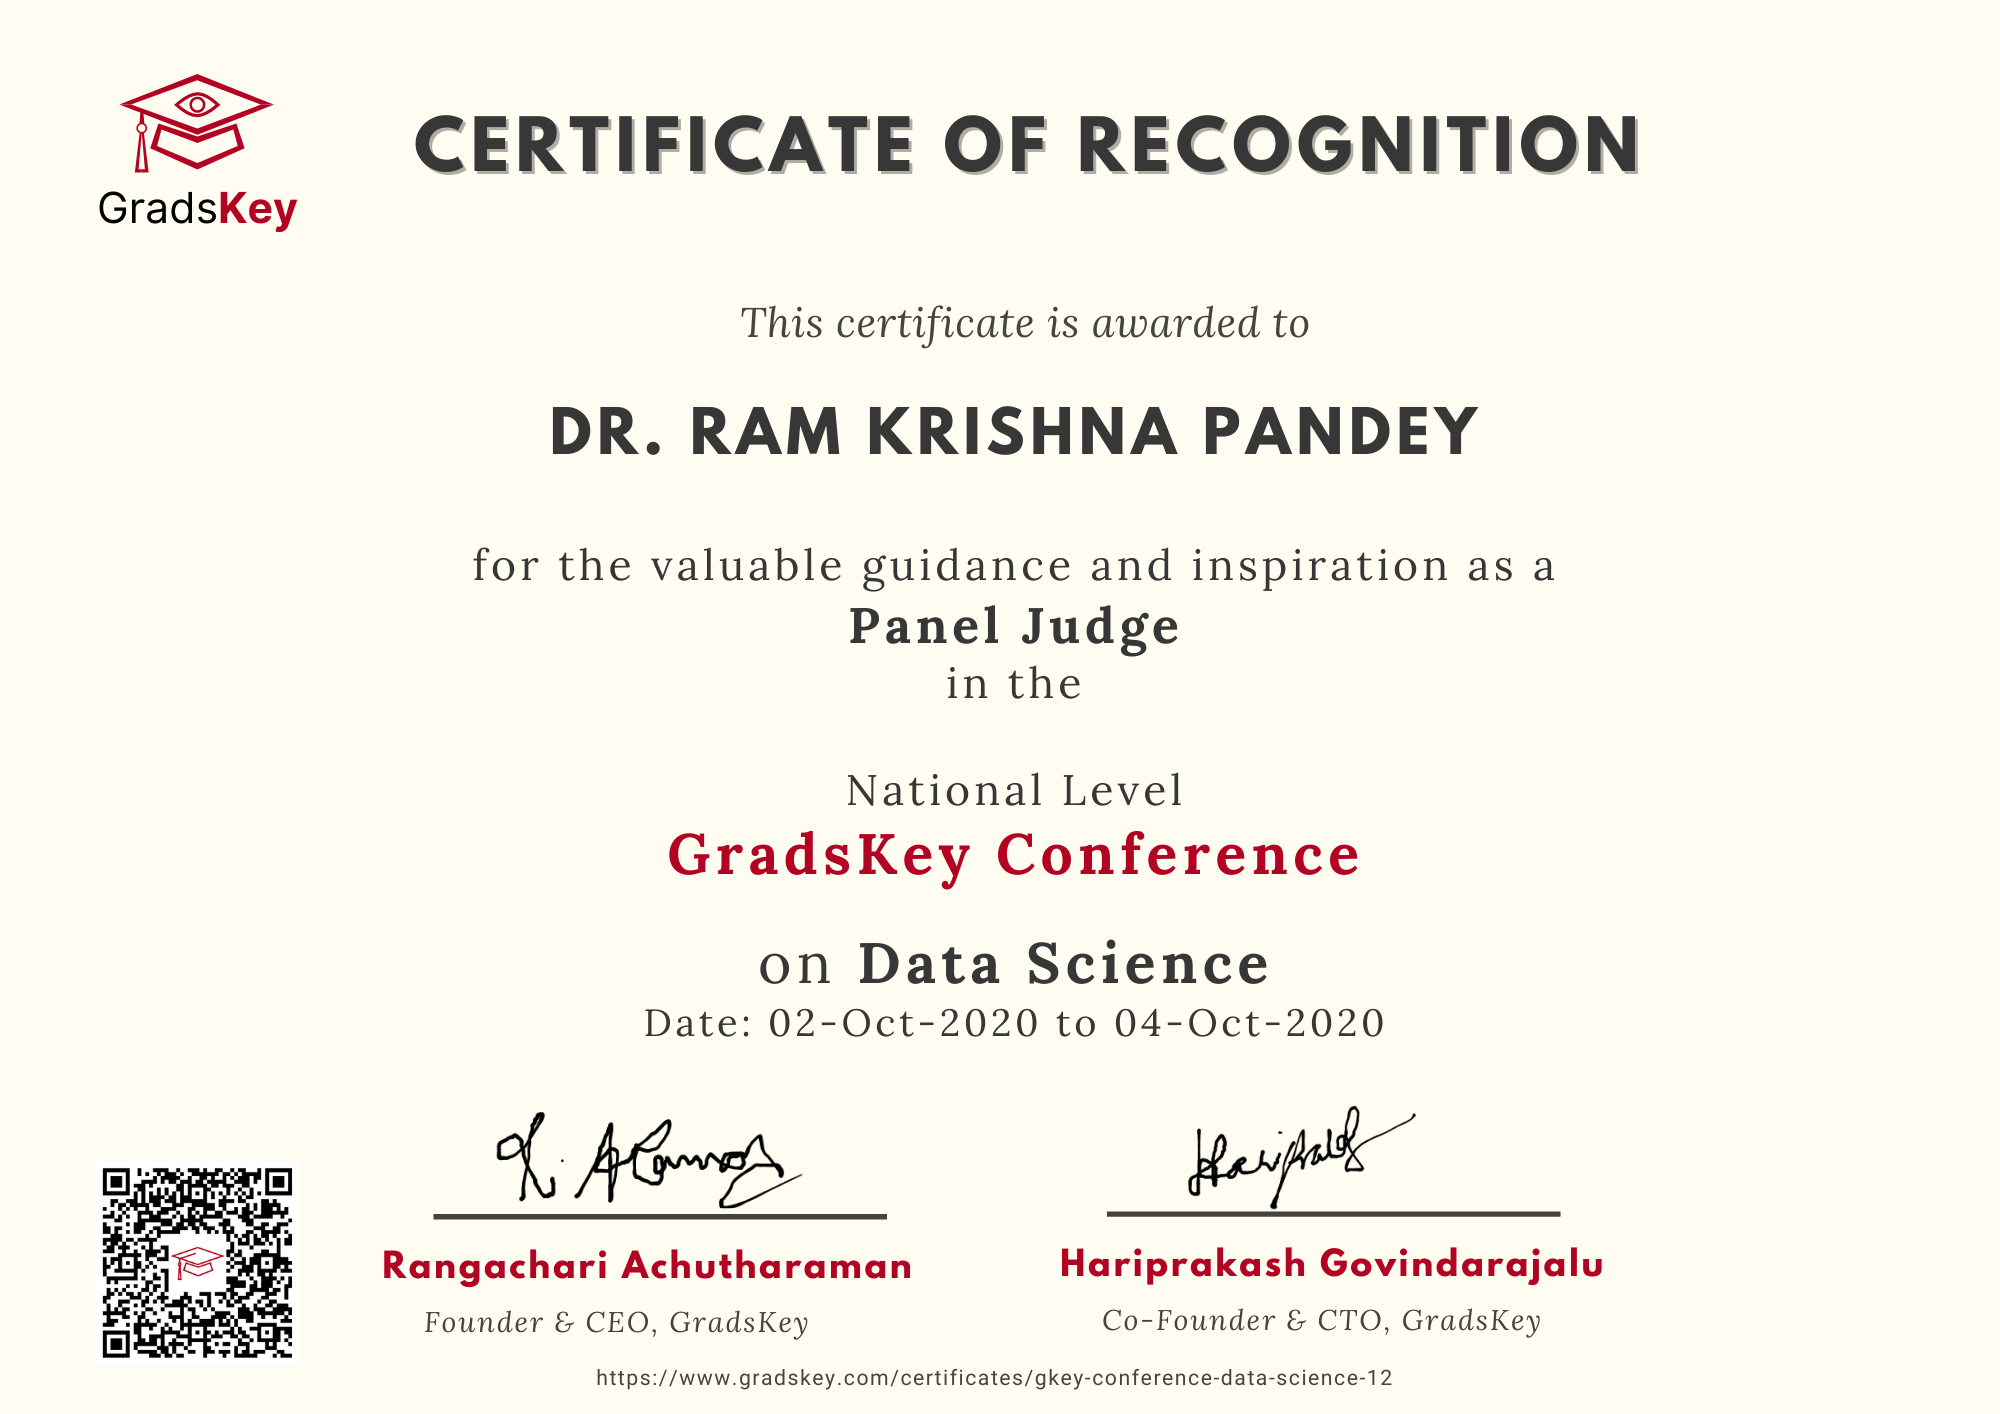 Certificate | GradsKey Data Science Conference - Panel Judge